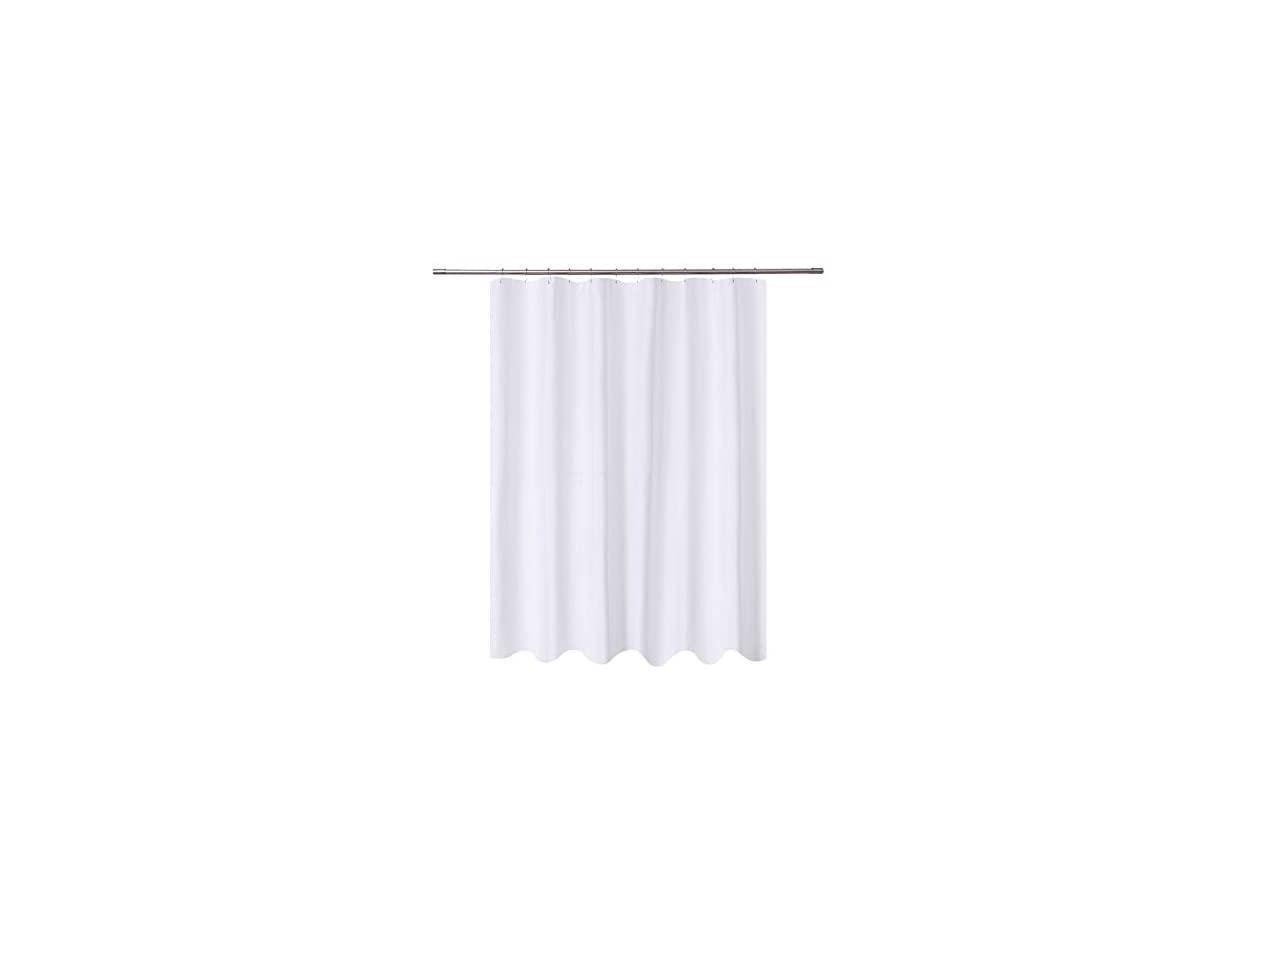 Fabric Shower Curtain Liner Long White Spa Bathroom Curtains w Grommets 72 x 78" 